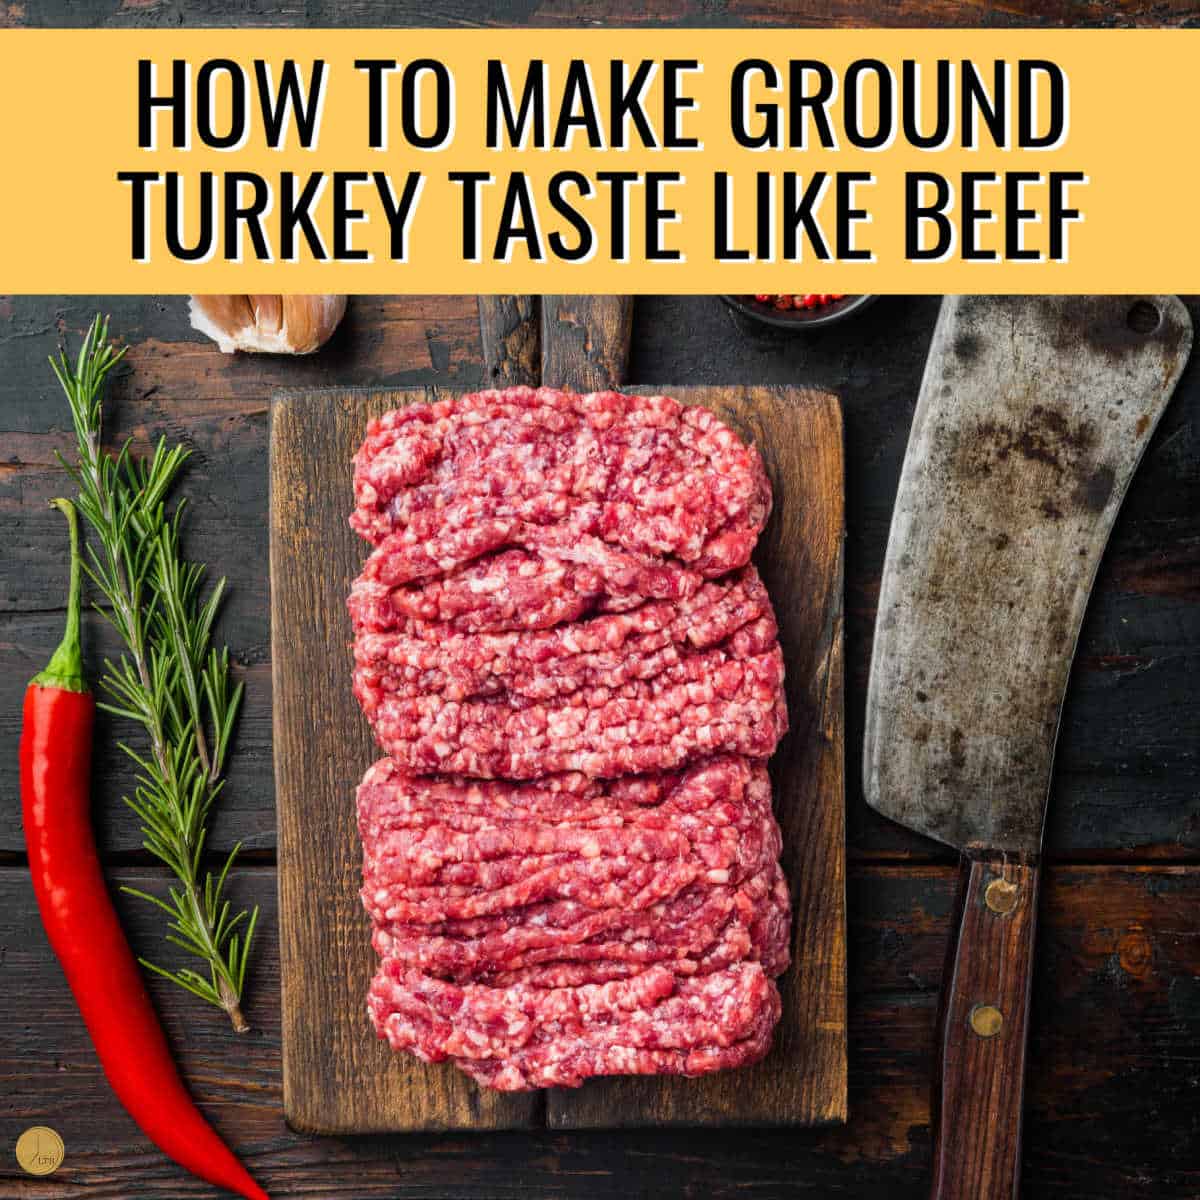 ground beef on a cutting board with text "how to make ground turkey taste like beef"